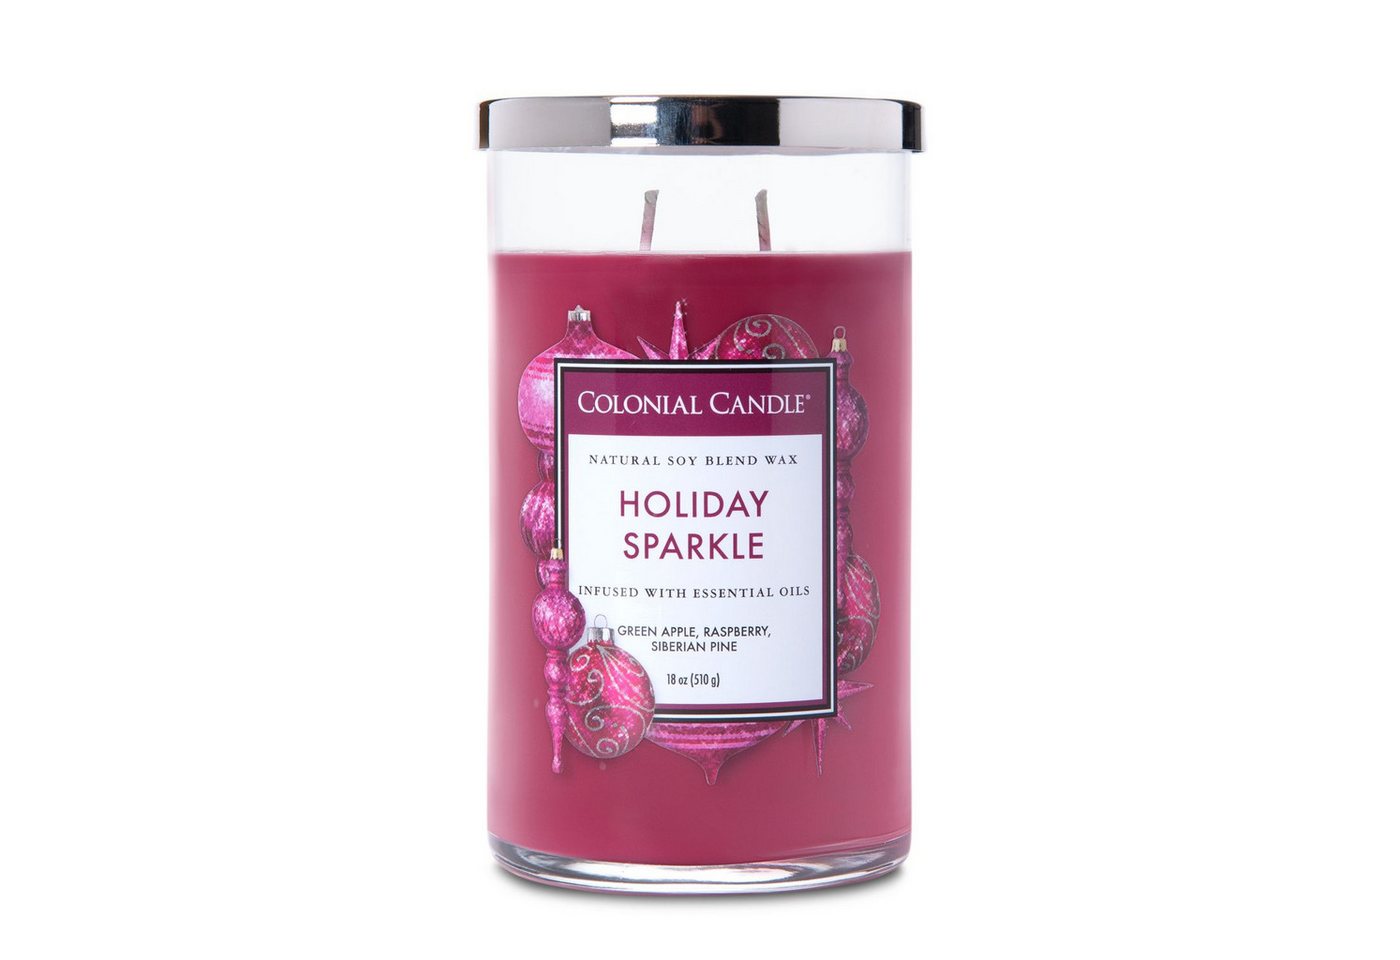 COLONIAL CANDLE Duftkerze Duftkerze Holiday Sparkle - 538g (1.tlg) von COLONIAL CANDLE